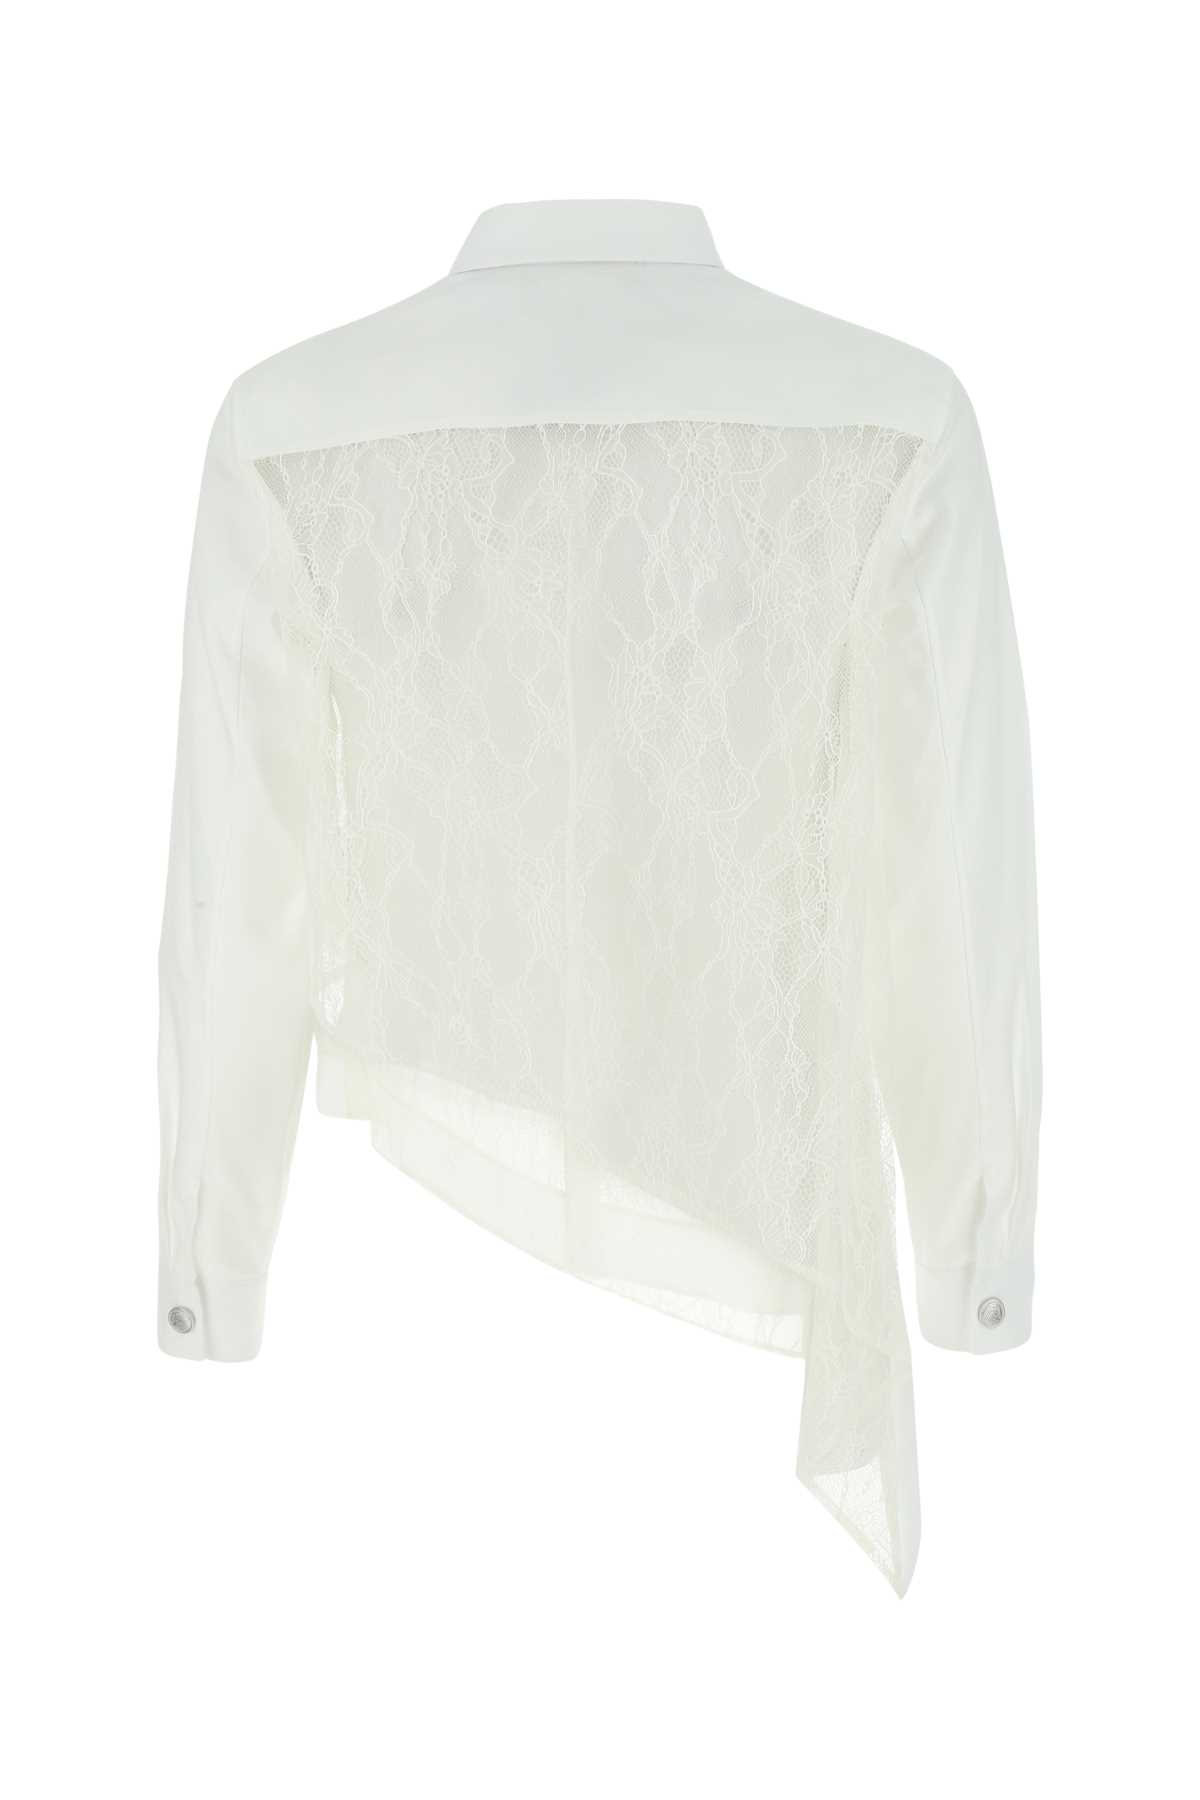 Koché White Cotton And Lace Shirt In 100